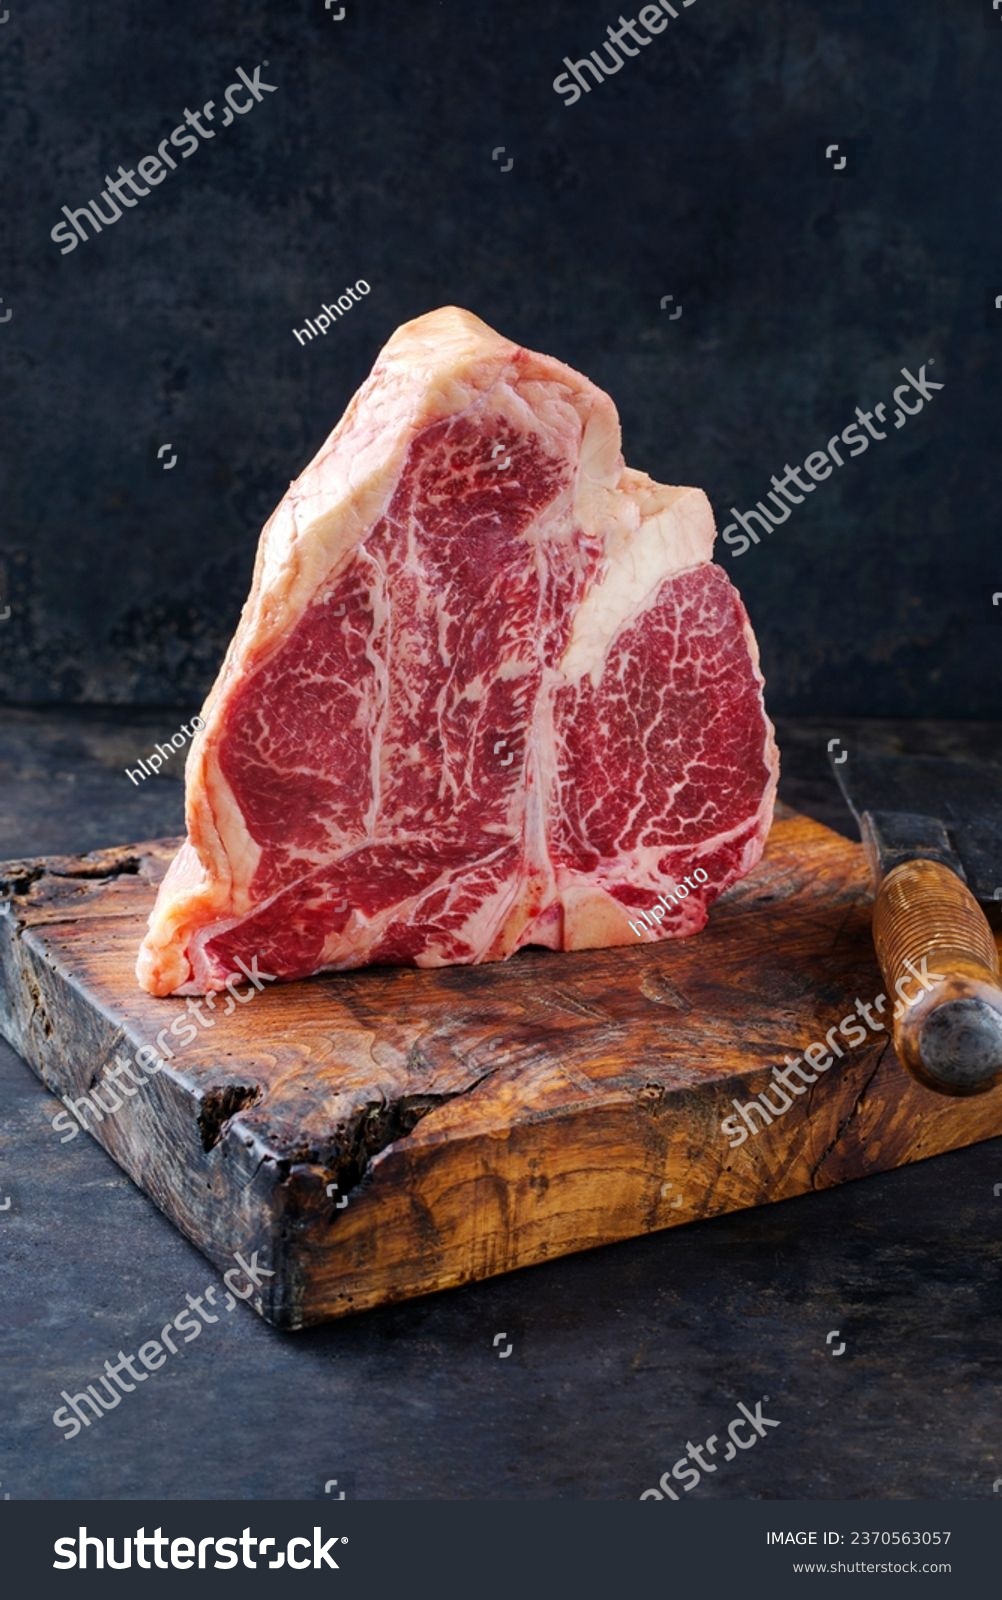 Raw dry aged wagyu porterhouse beef steak offered as close-up on rustic old wooden board with a knife  #2370563057